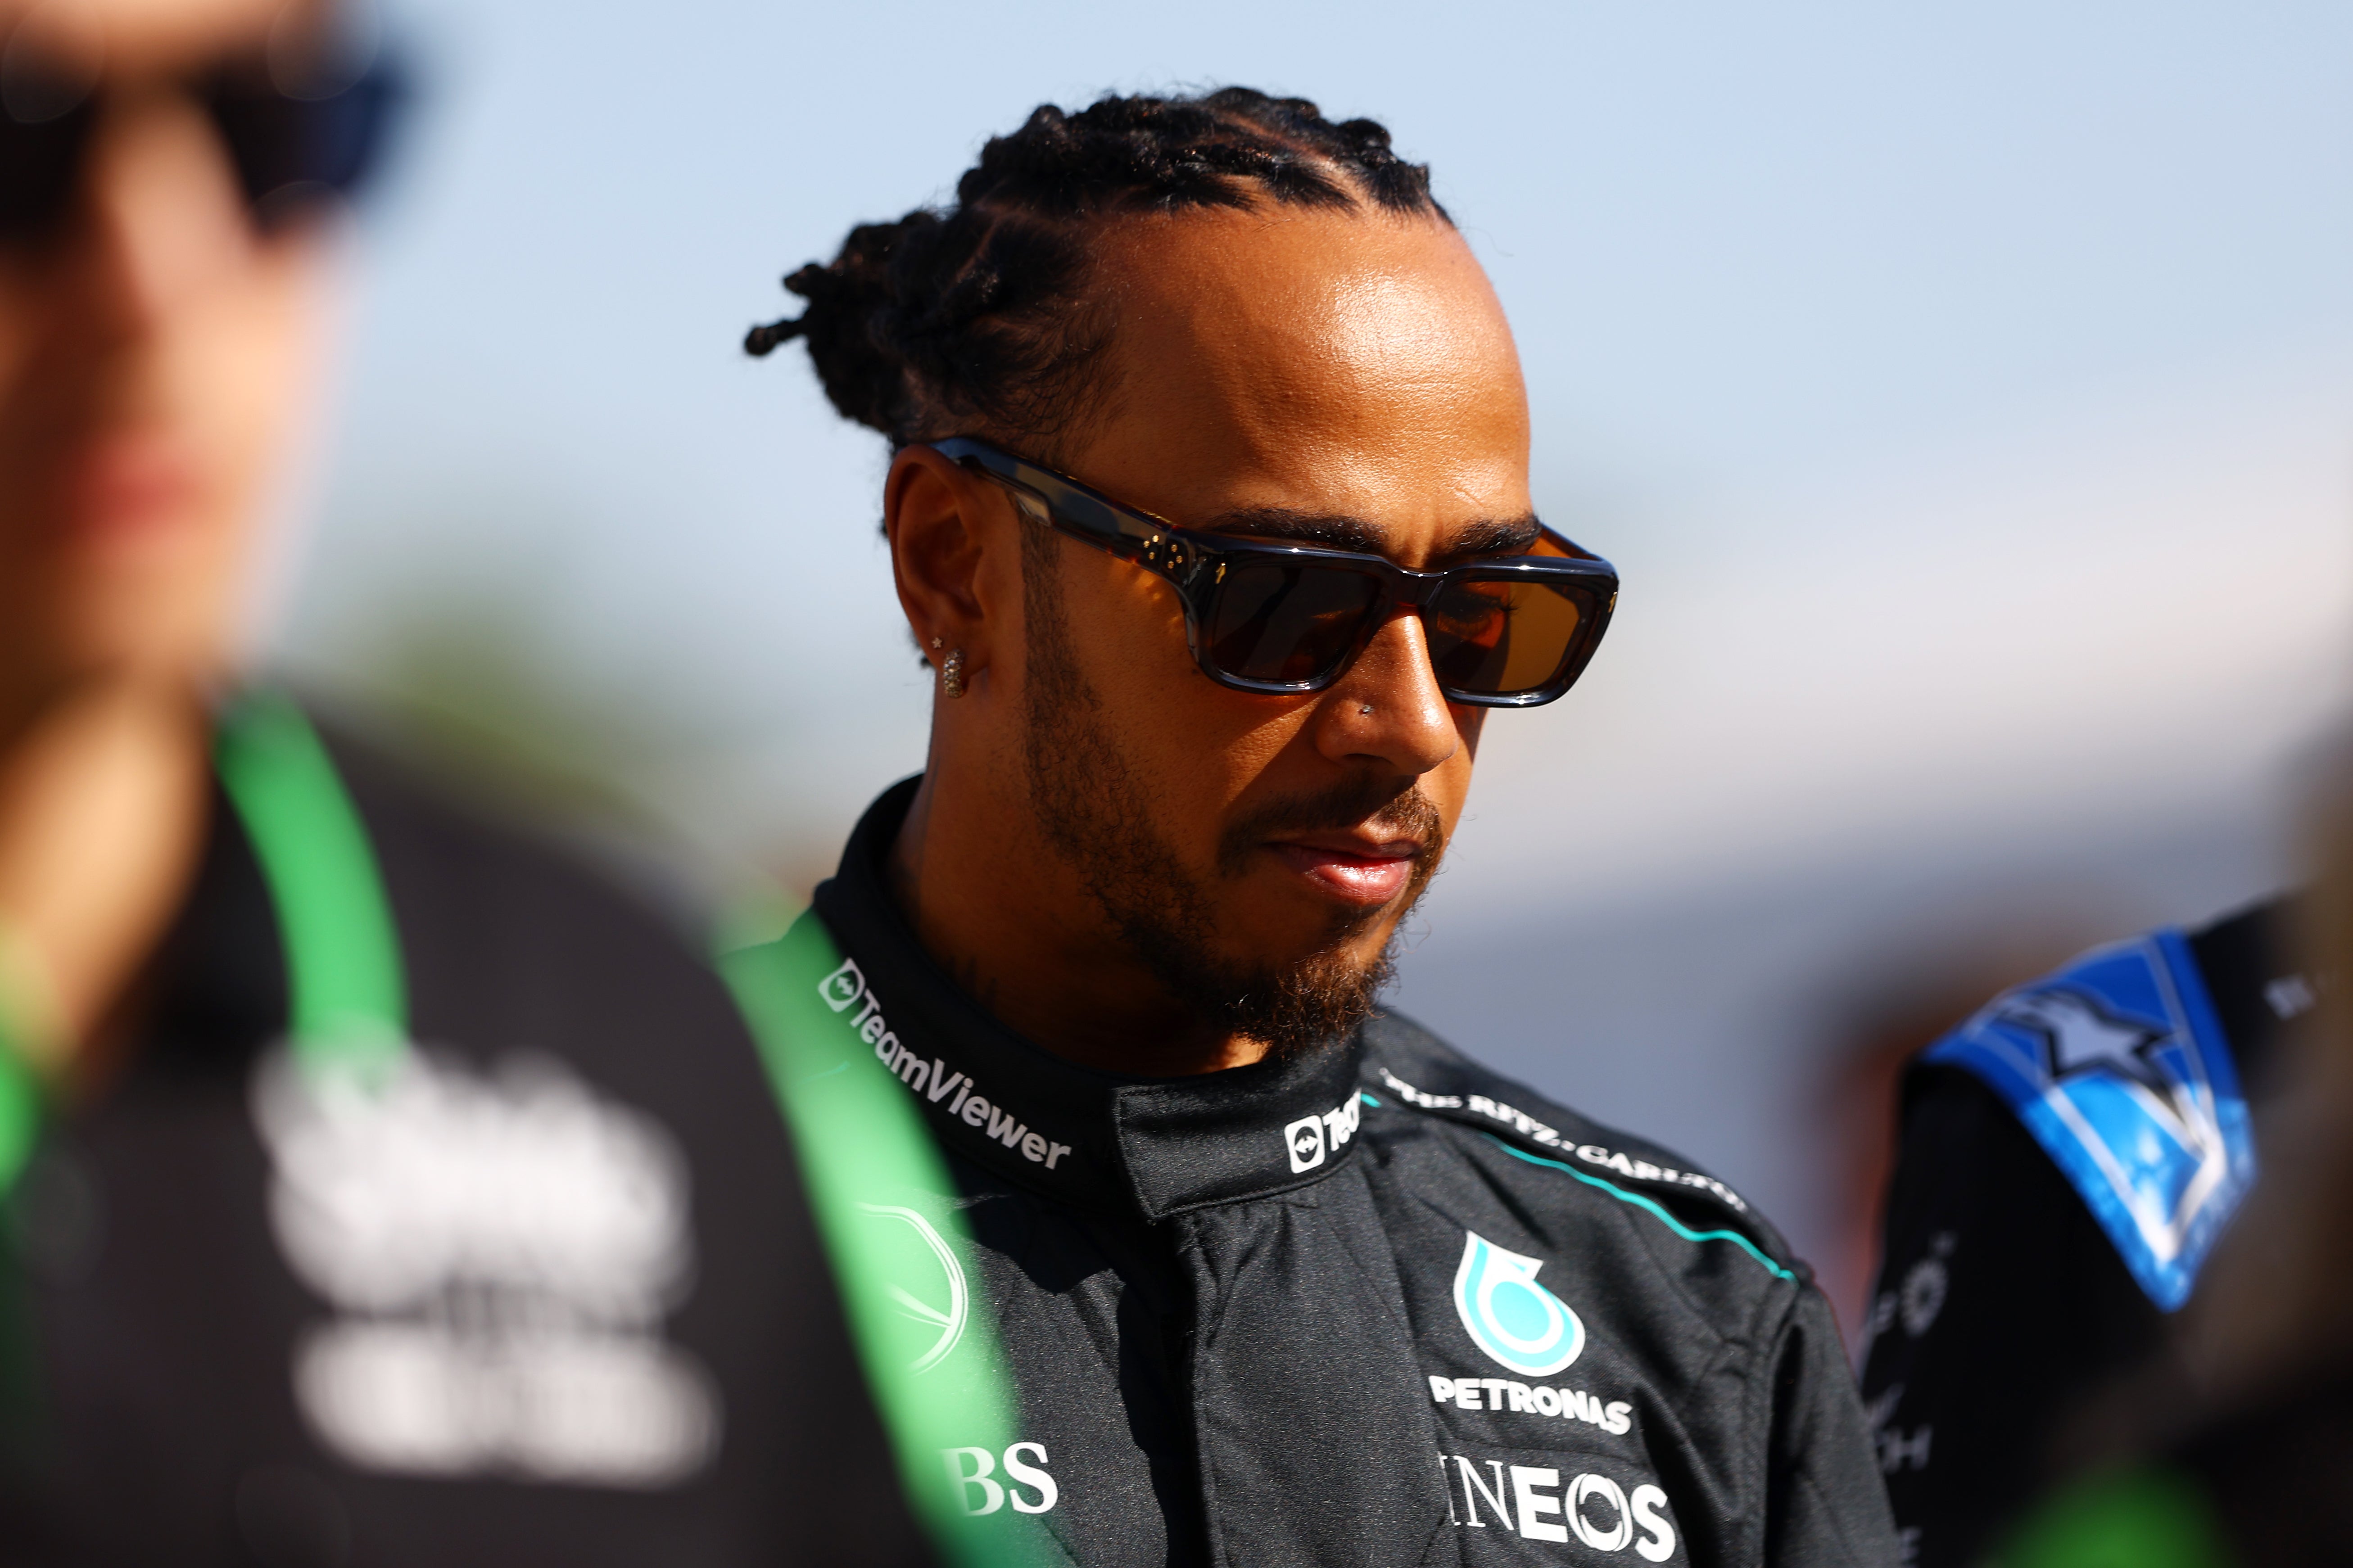 Lewis Hamilton has not won a race in more than two years